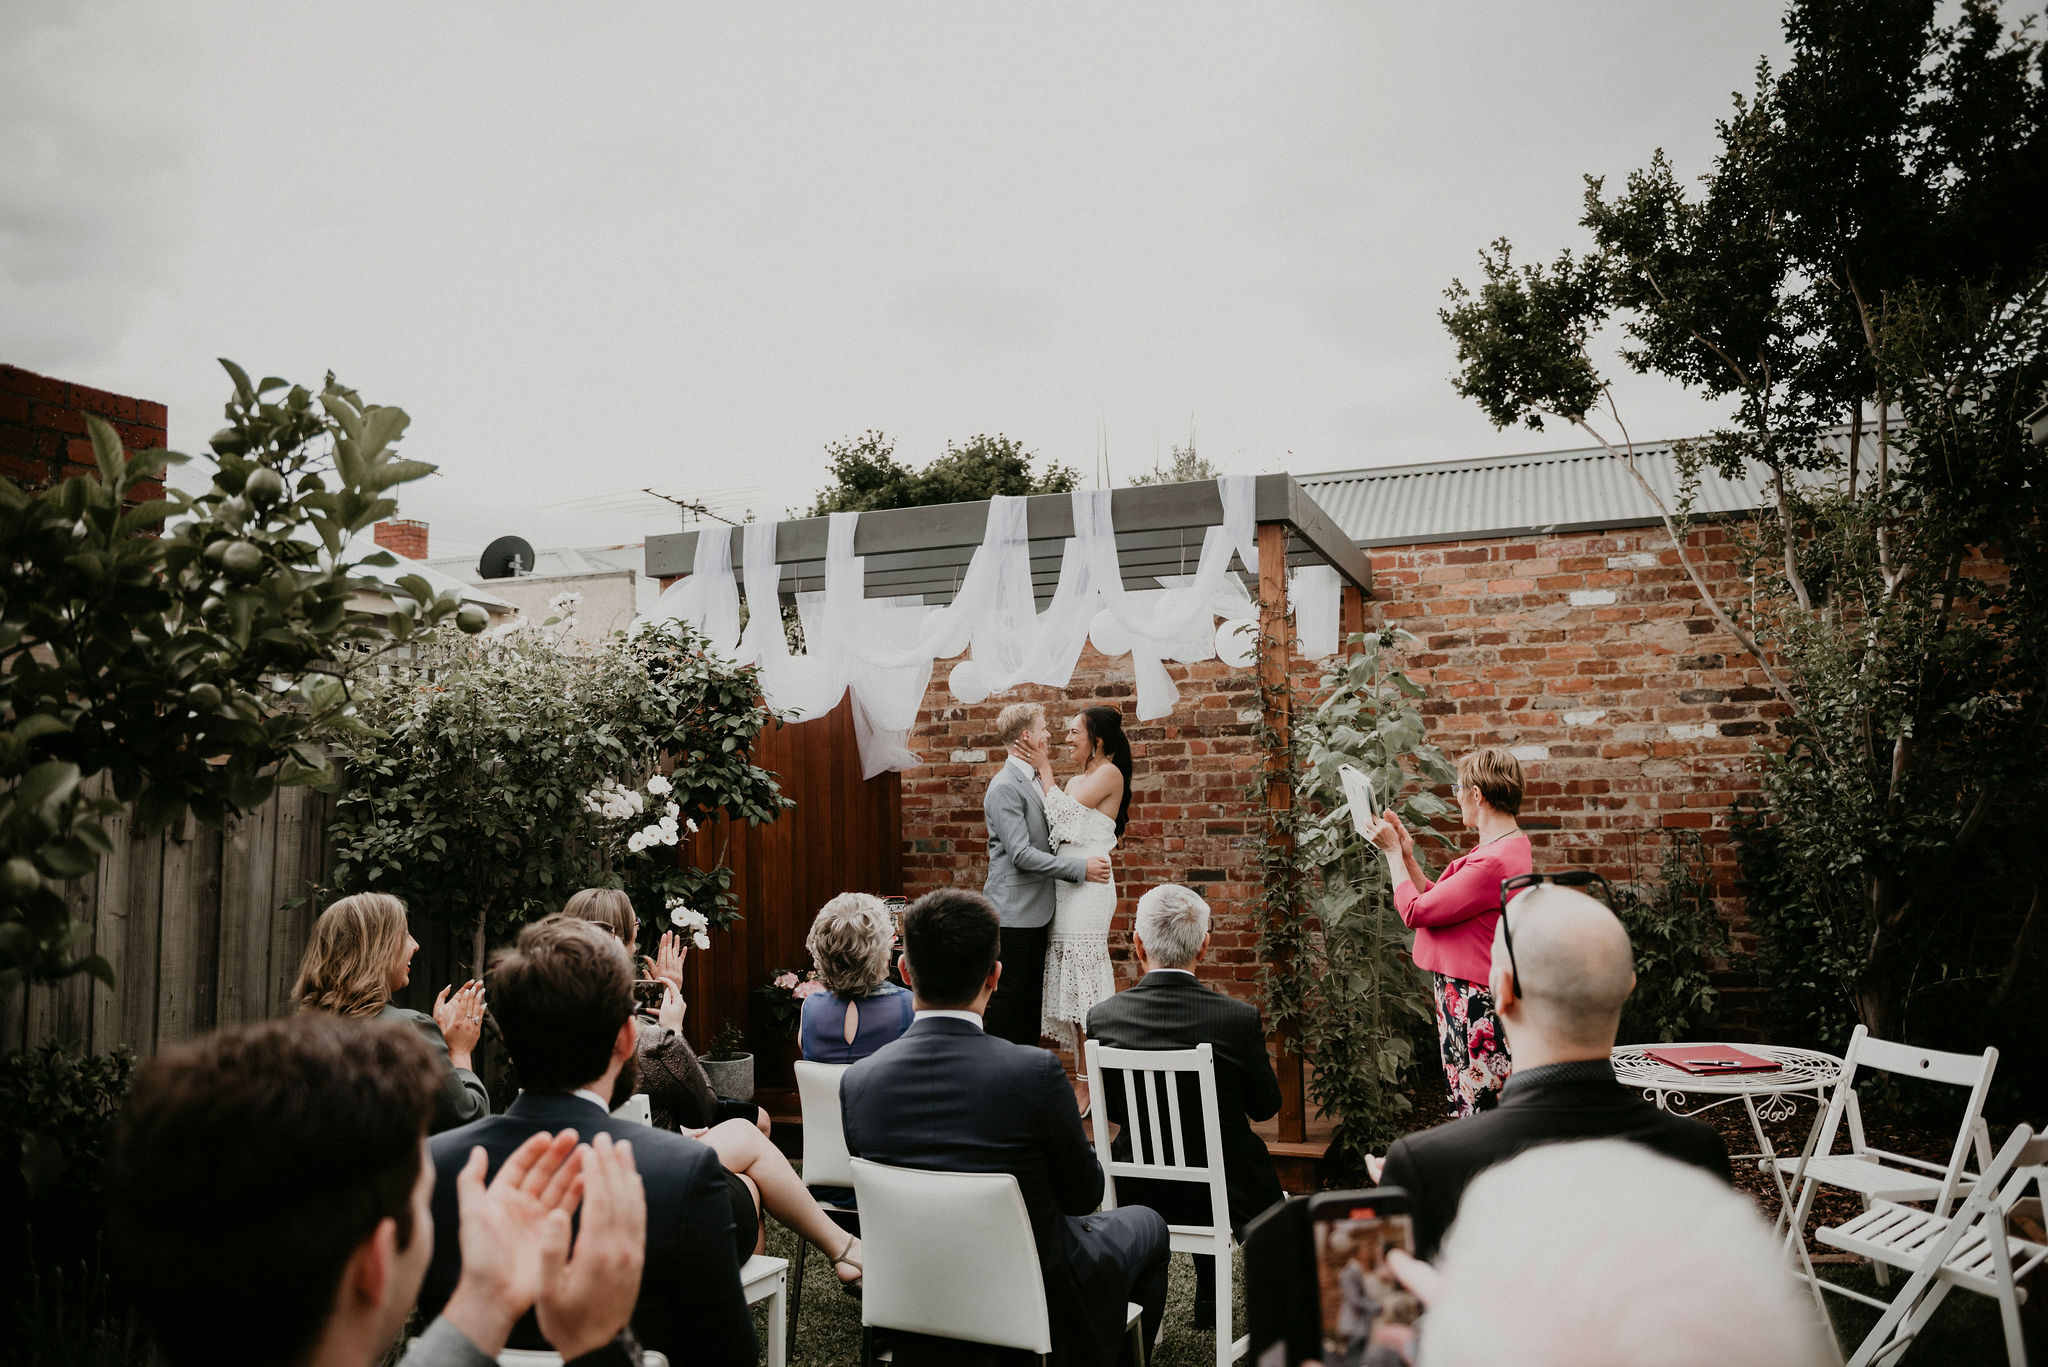 Intimate Wedding at Home Lets Elope Melbourne Celebrant Photographer Elopement Package Victoria Sarah Matler Photography Elope at Home Footscray weddings intimate